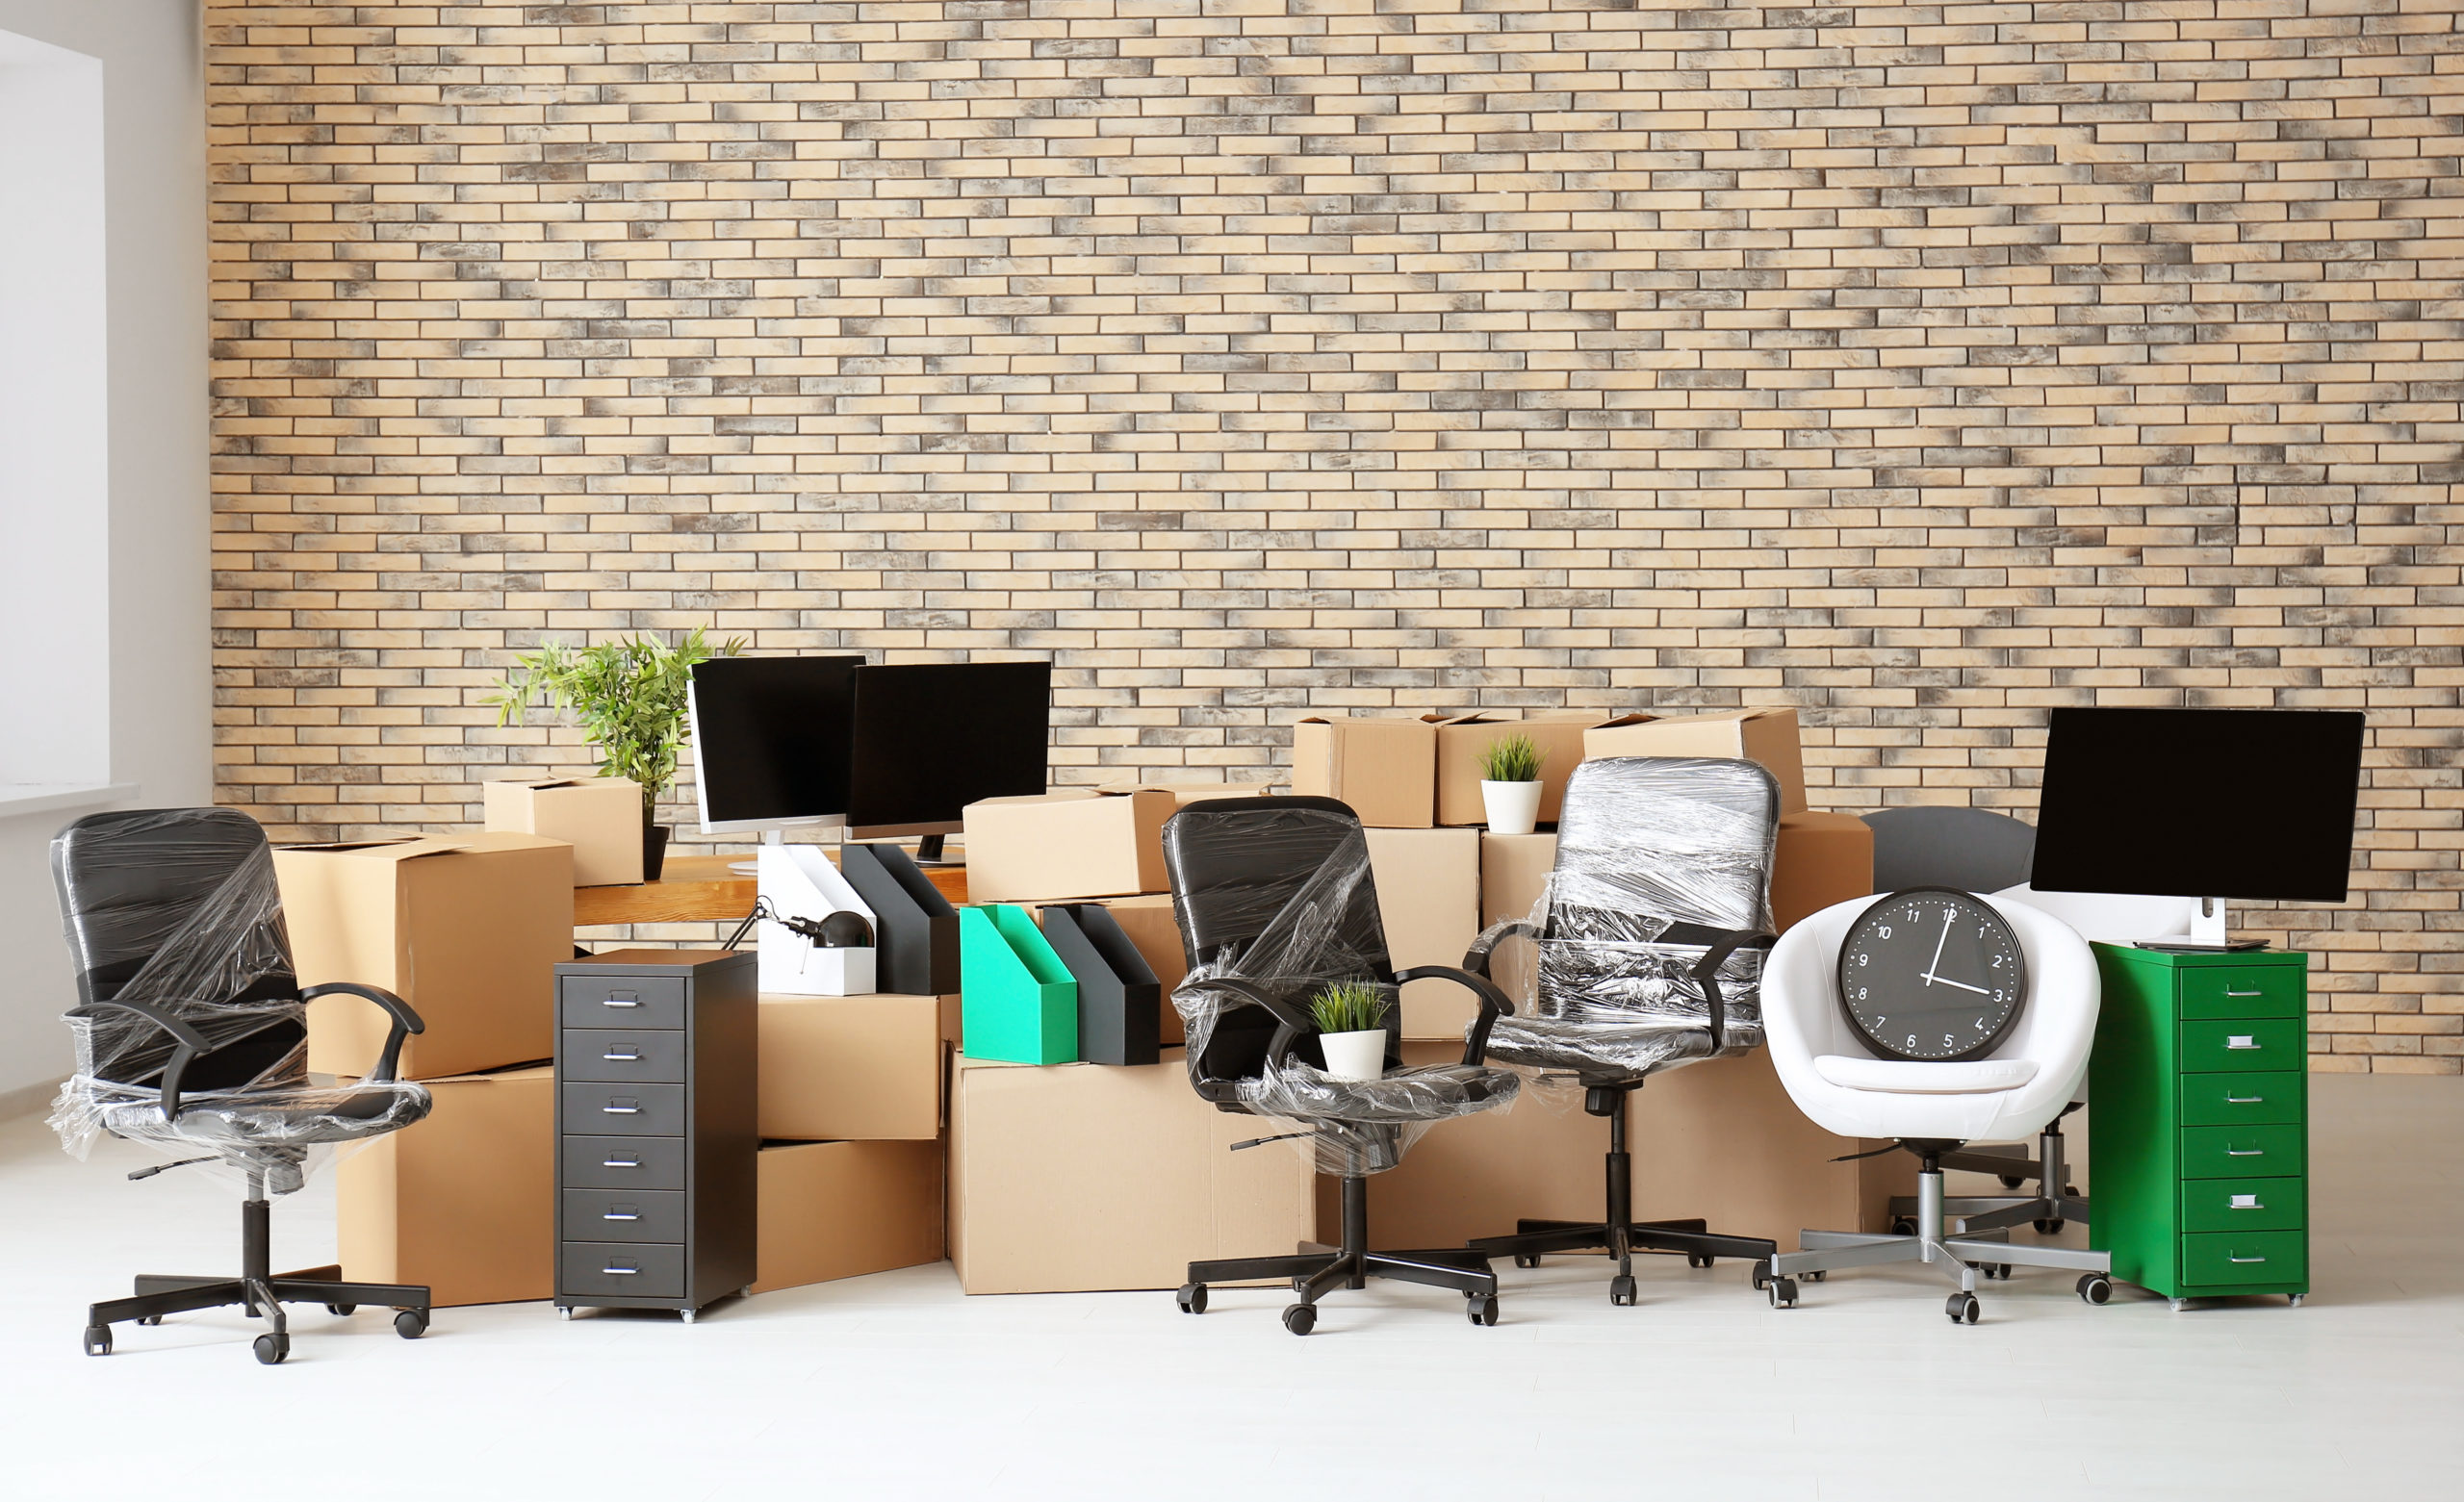 Furniture Movers in Denver Can Help Your Next Move Amazing